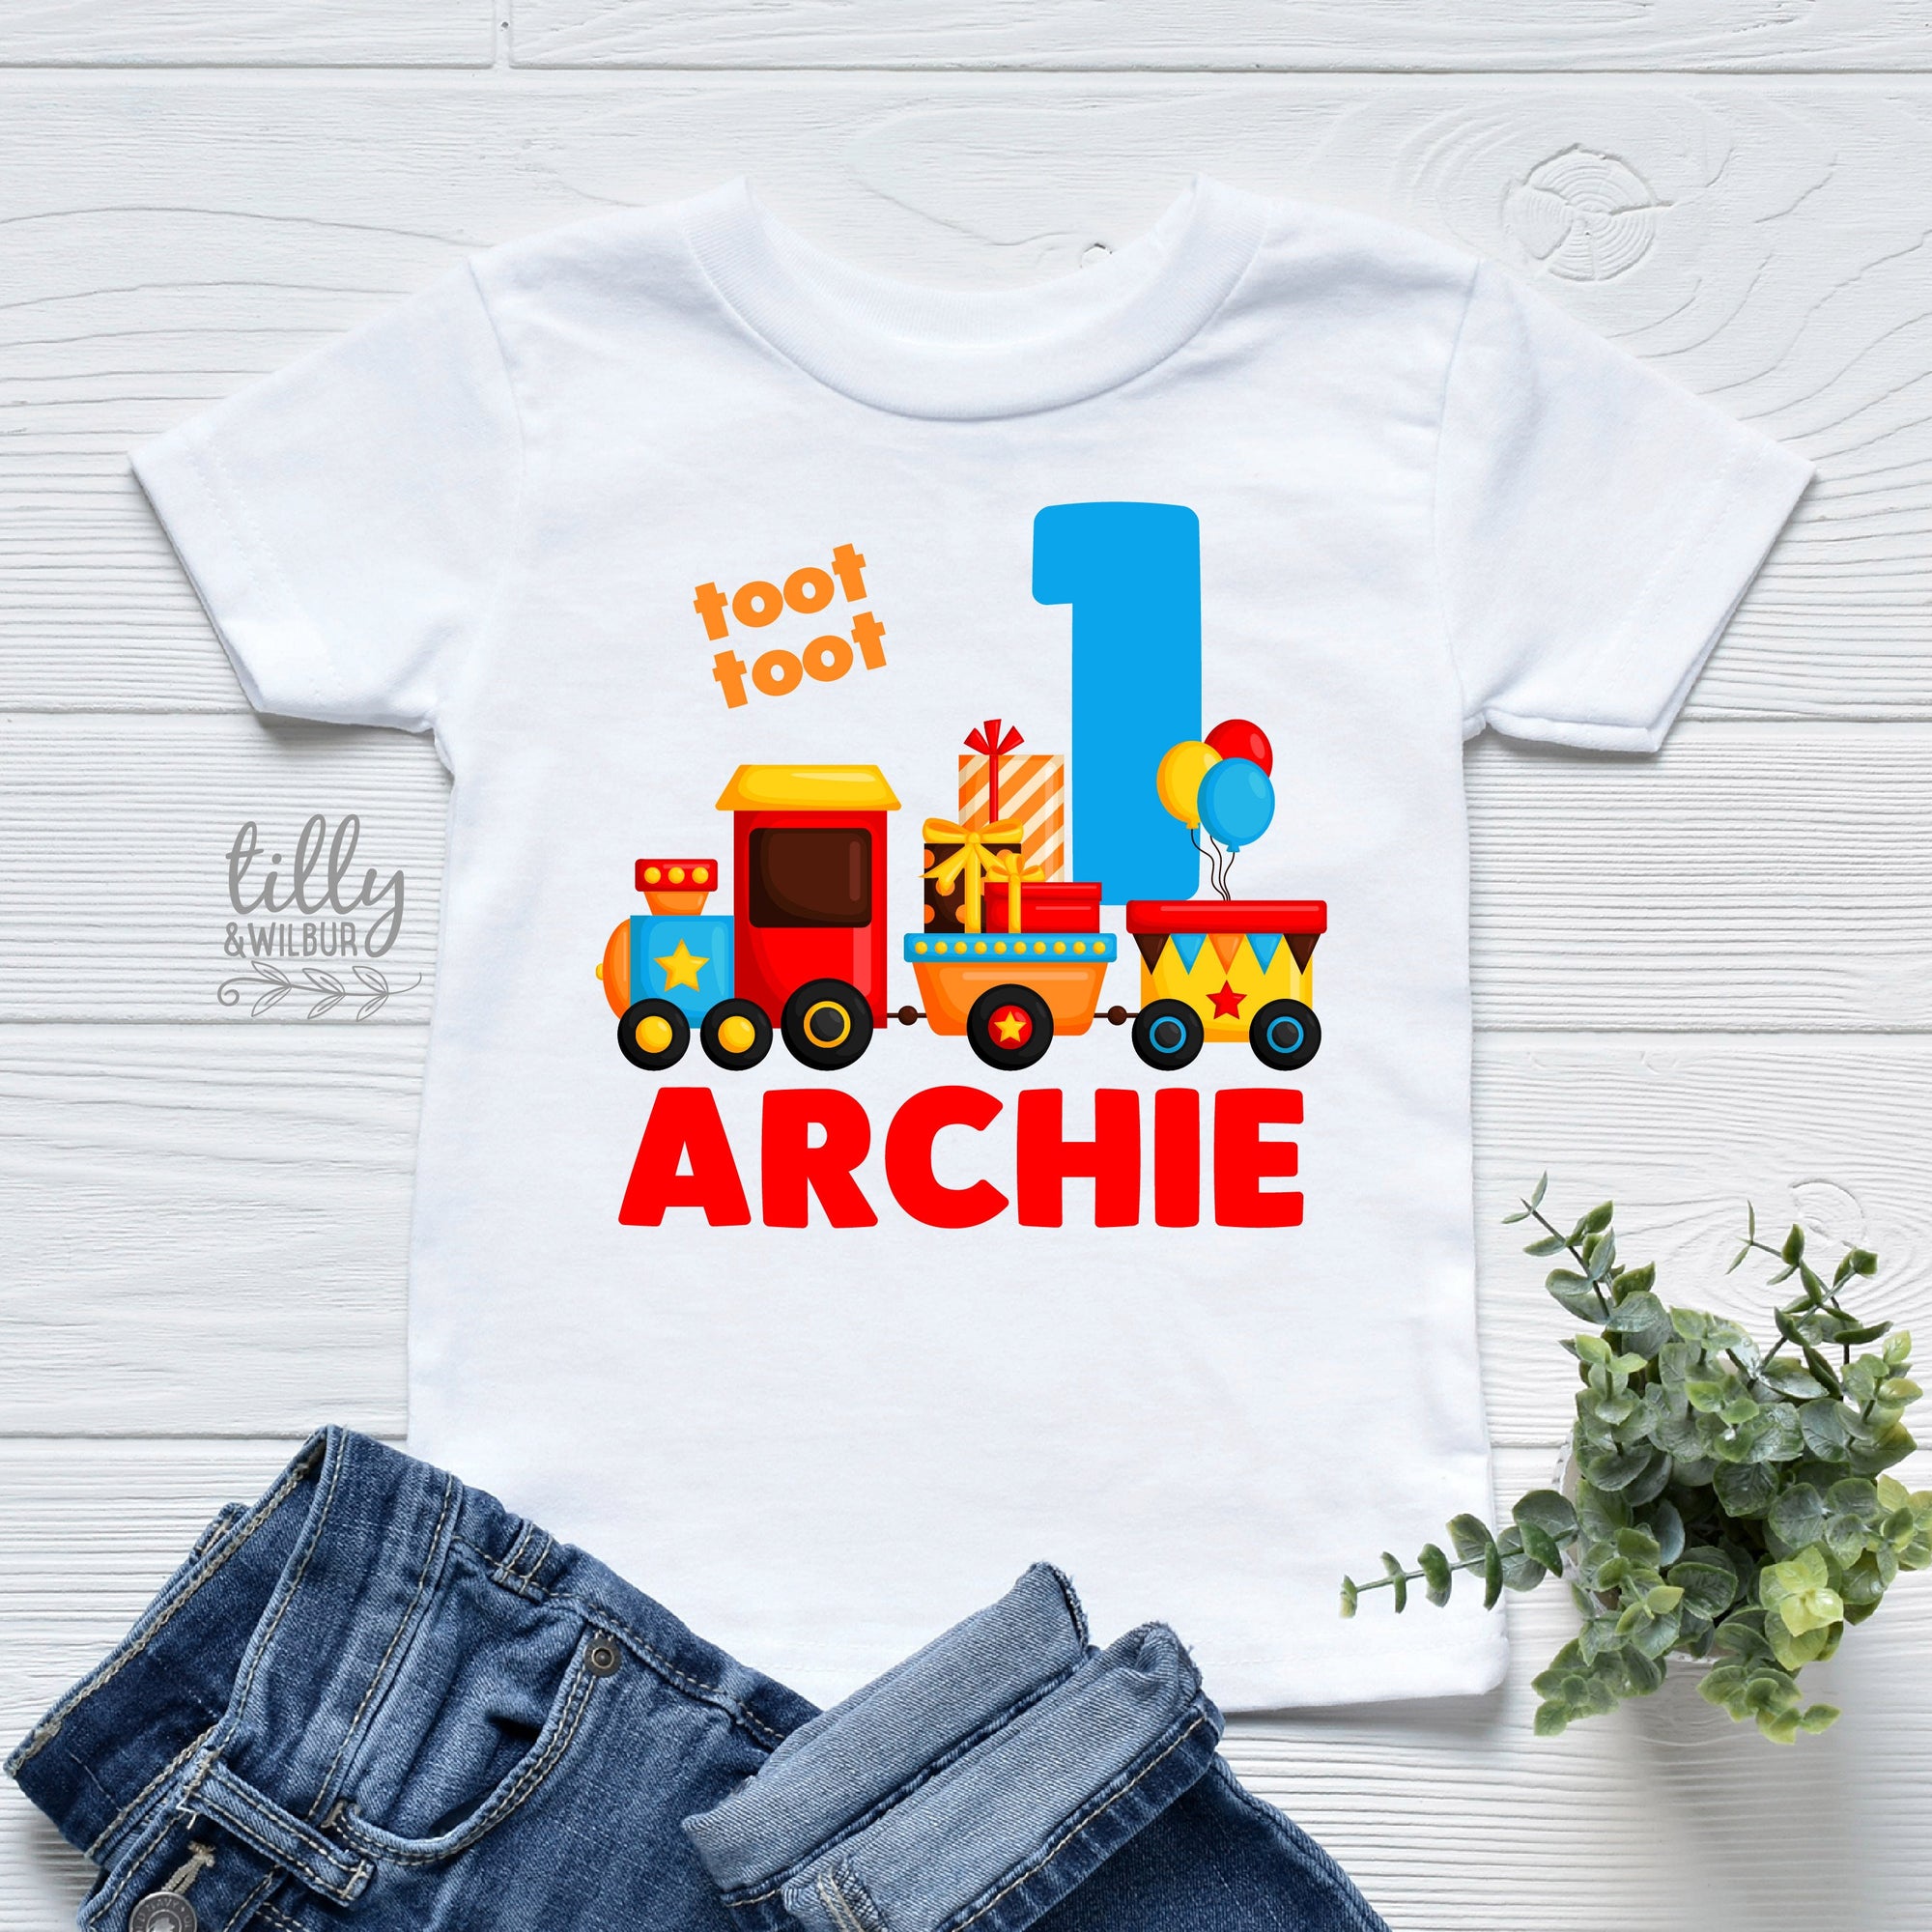 One Personalised Boys 1st Birthday T-Shirt, 1st Birthday Gift, First Birthday T-Shirt, Custom Name, Cake Smash Outfit, Train Party Theme